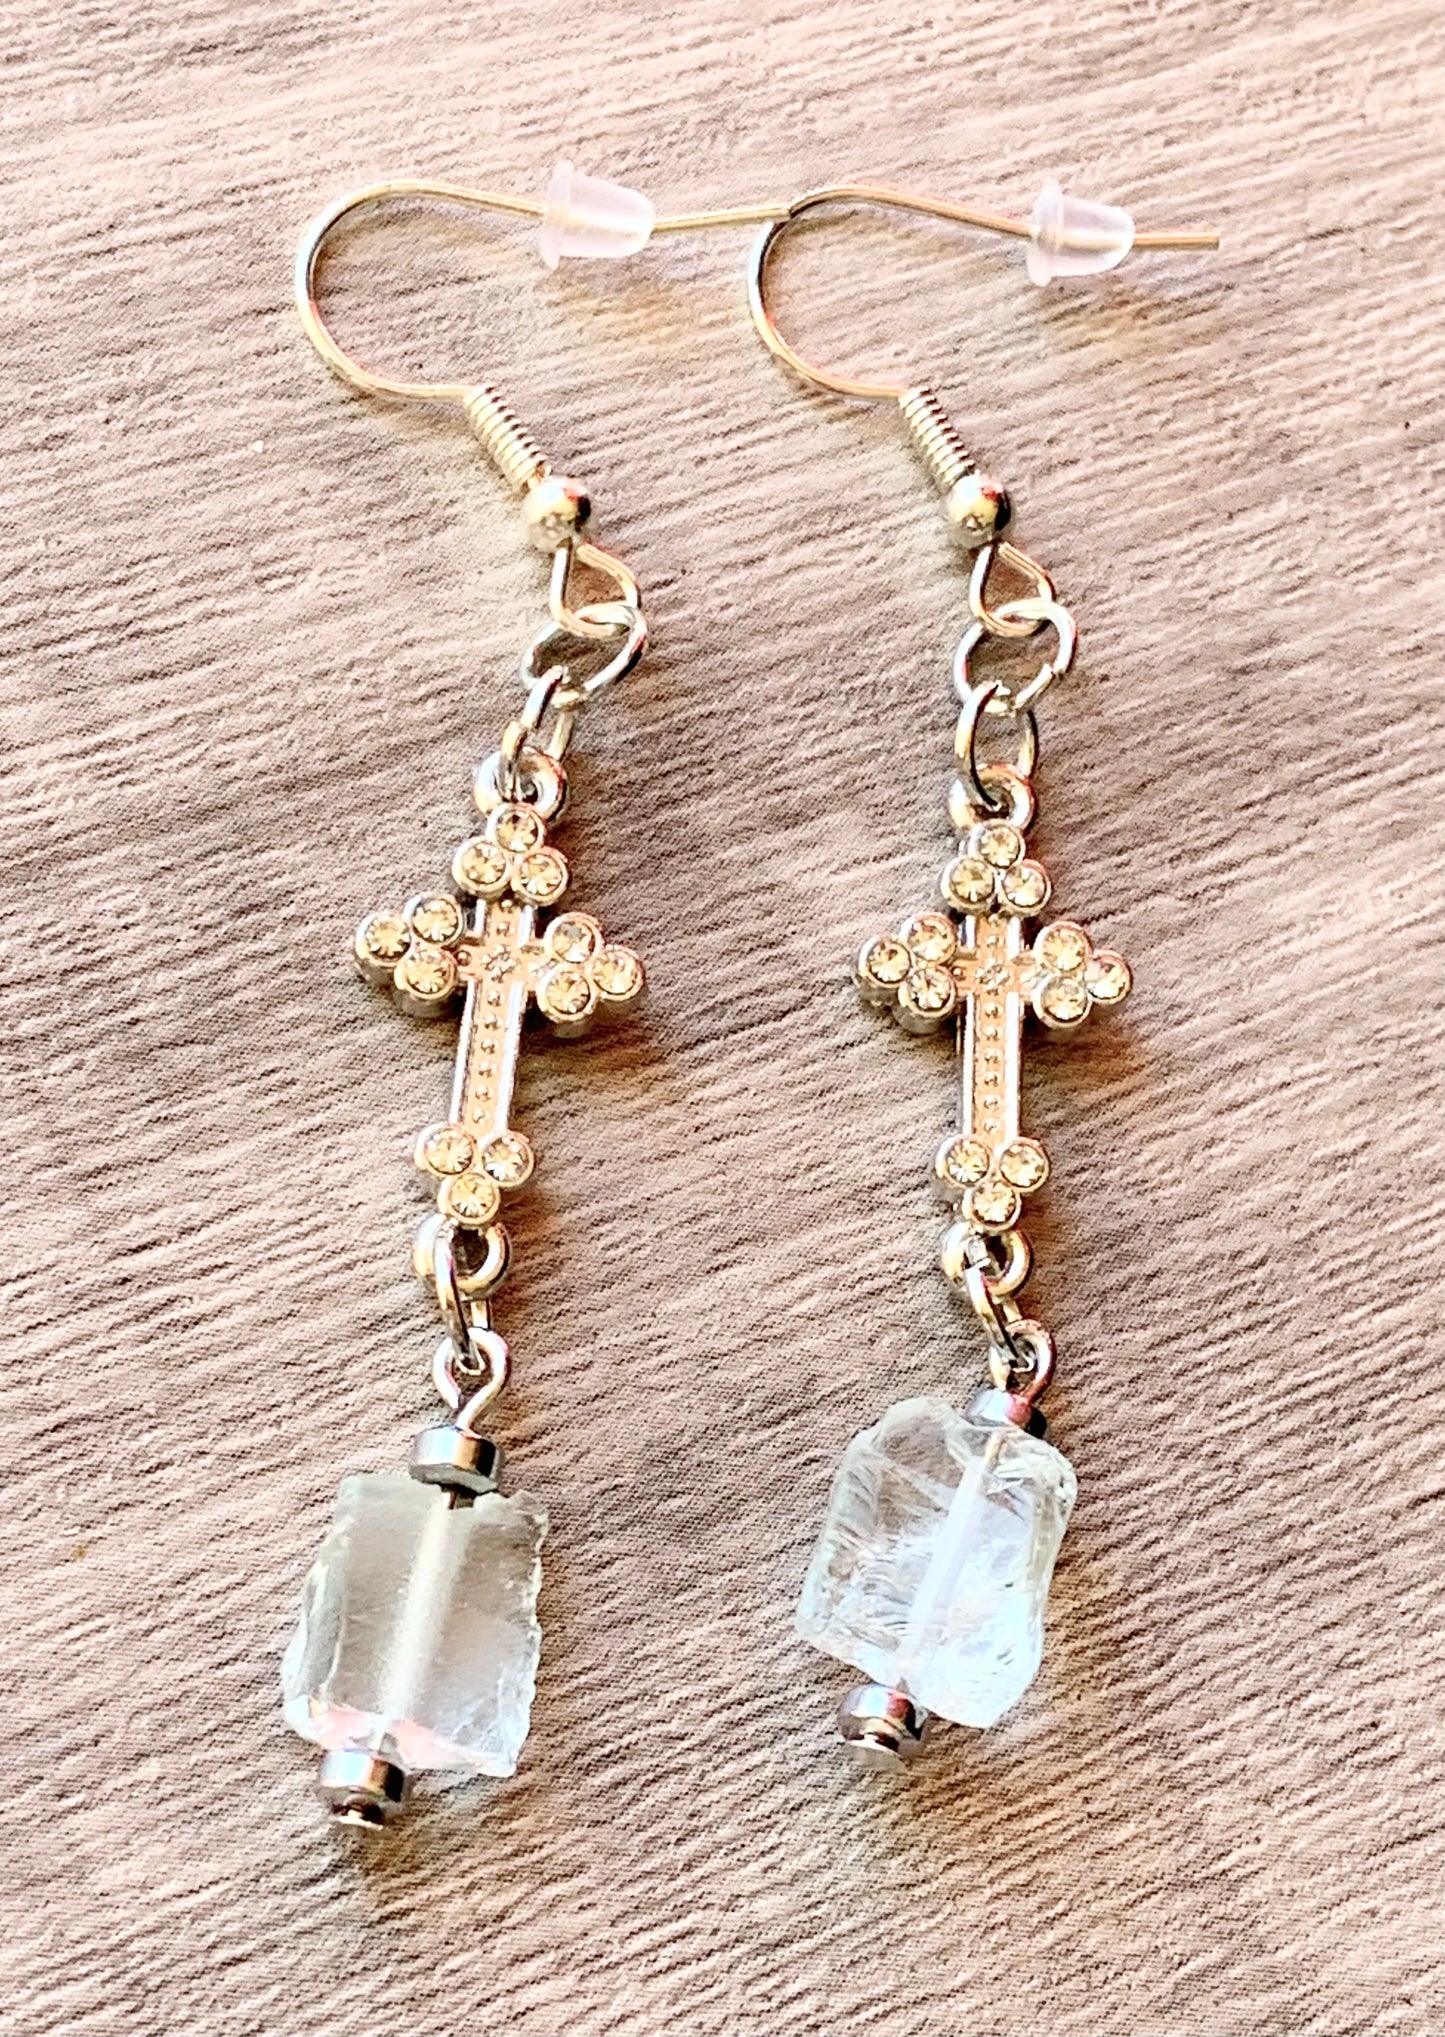 Linore Handmade Raw Light Blue Topaz and Silver Plated Hematite Earrings with a Rhinestone Cross